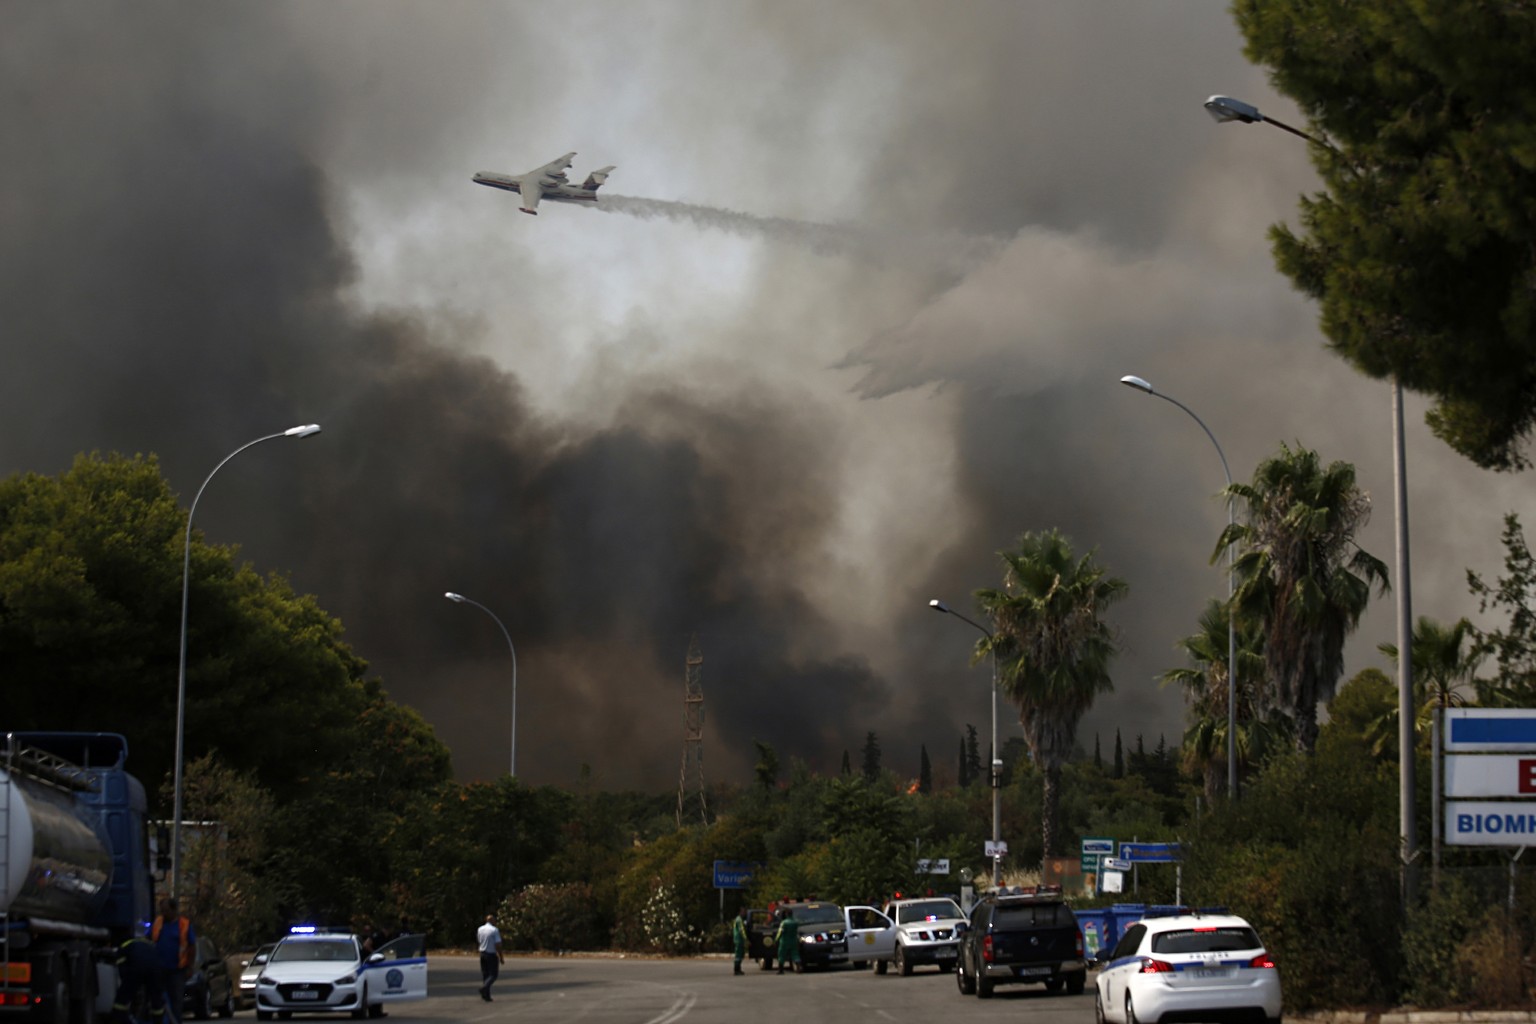 epa09392020 A firefighting aircraft douses a wildfire in the area of Varybobi, northeastern suburb of Athens, Greece, 03 August 2021. The wildfire that broke out in a forest in the Varybobi area on Au ...